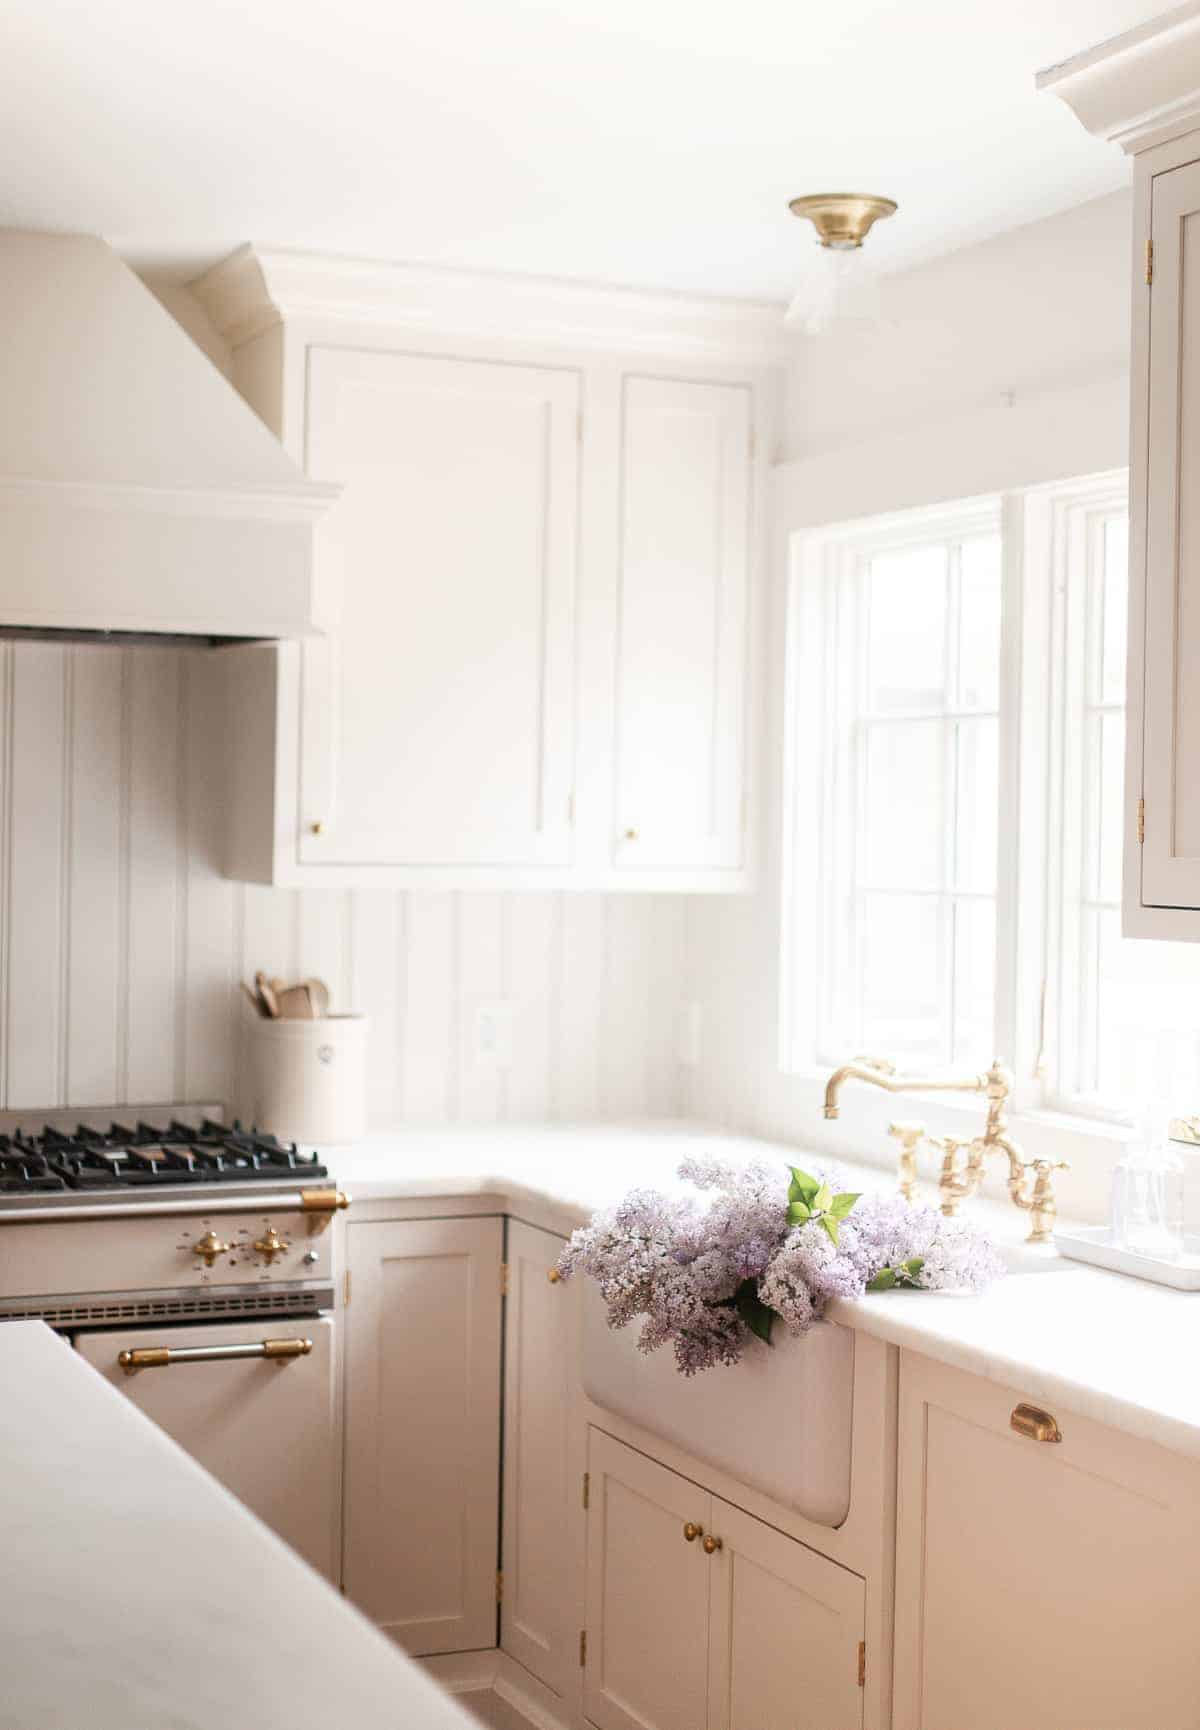 kitchen with walls and trim painted in the same color and flowers in the sink